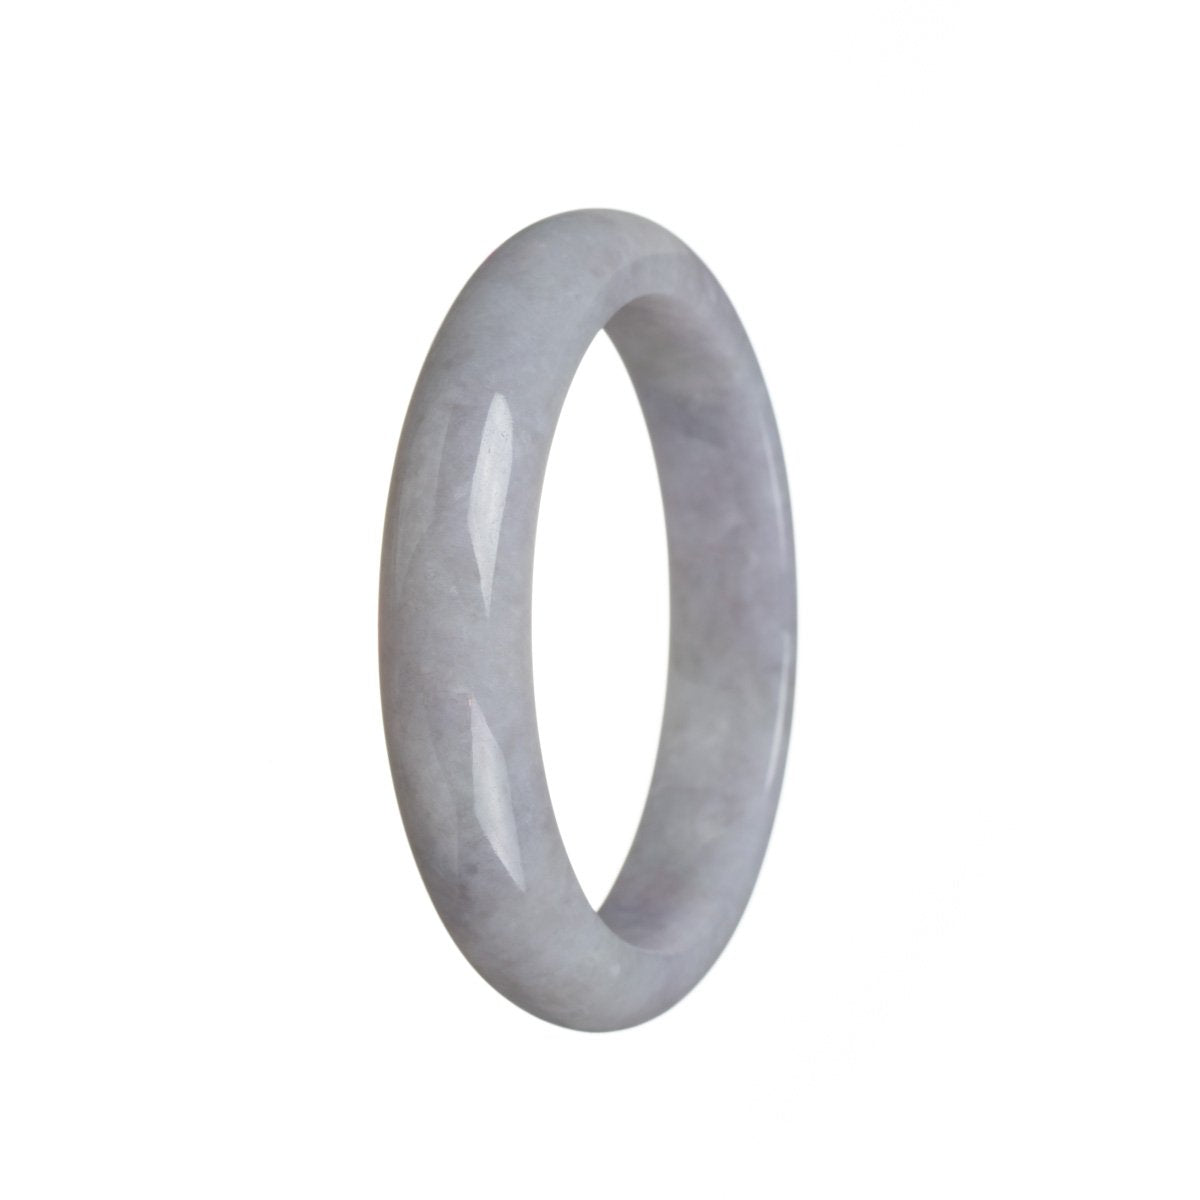 A lavender-colored traditional jade bracelet in a half-moon shape, certified as natural and authentic.